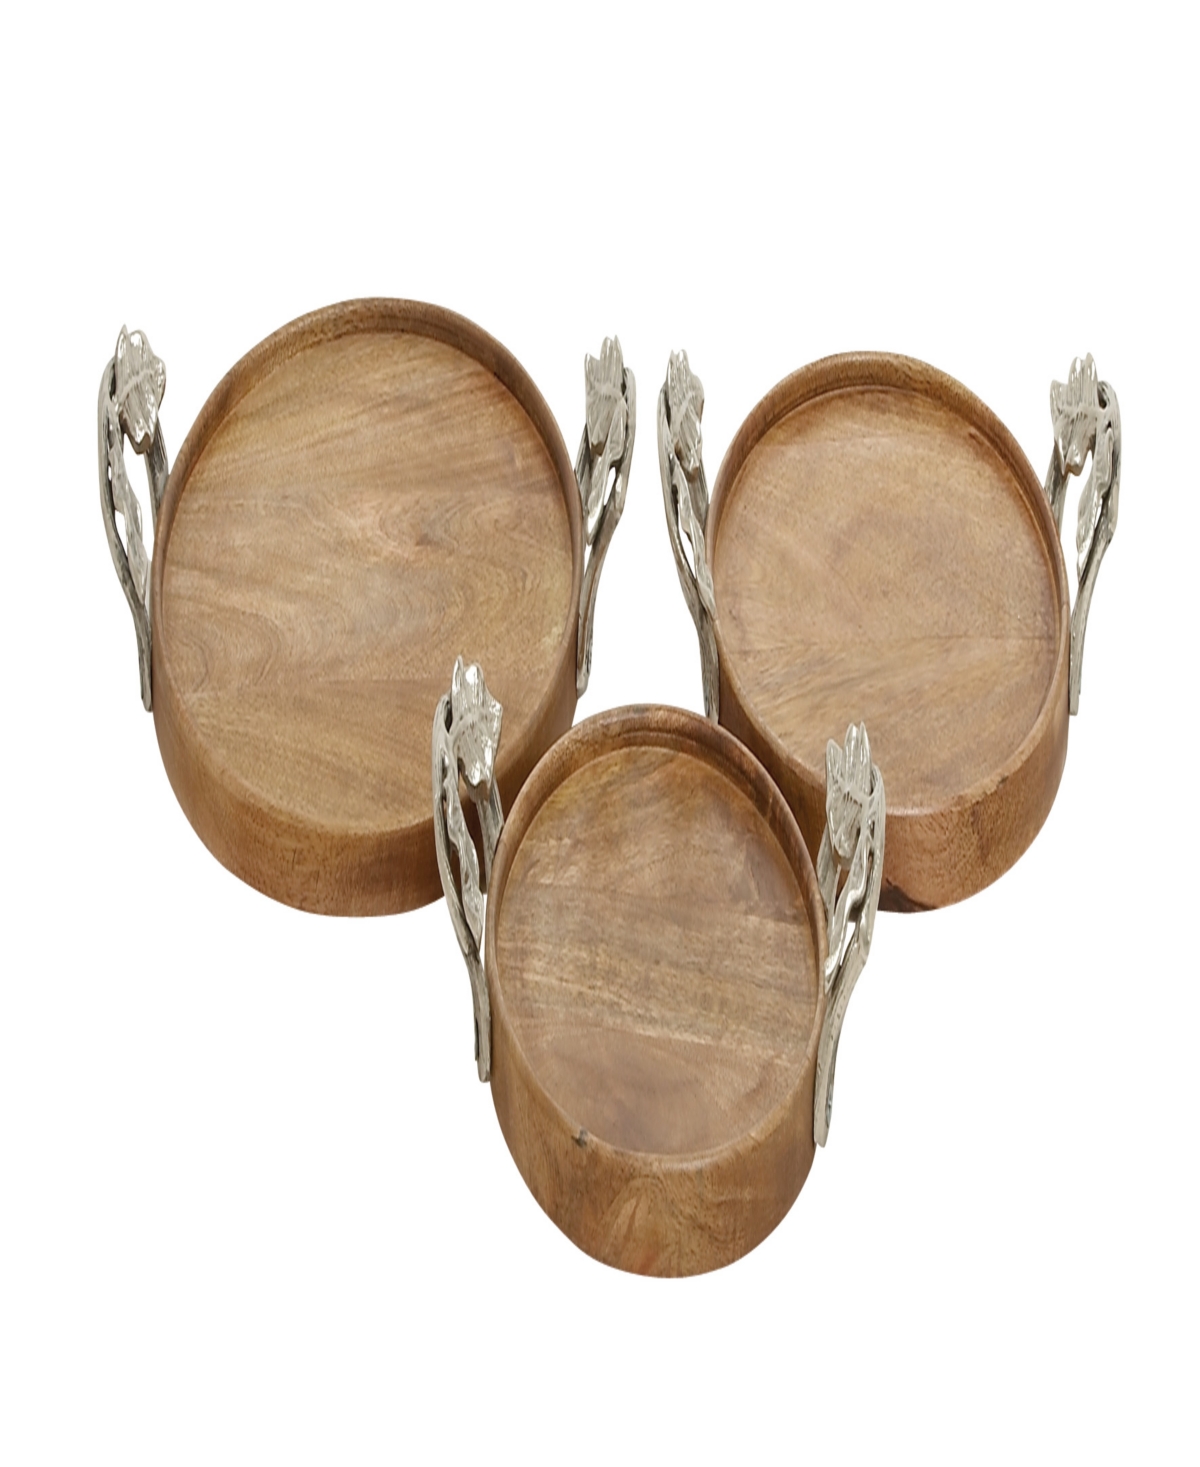 Rosemary Lane Mango Wood Tray With Metal Handles, Set Of 3, 13", 15", 17" W In Brown